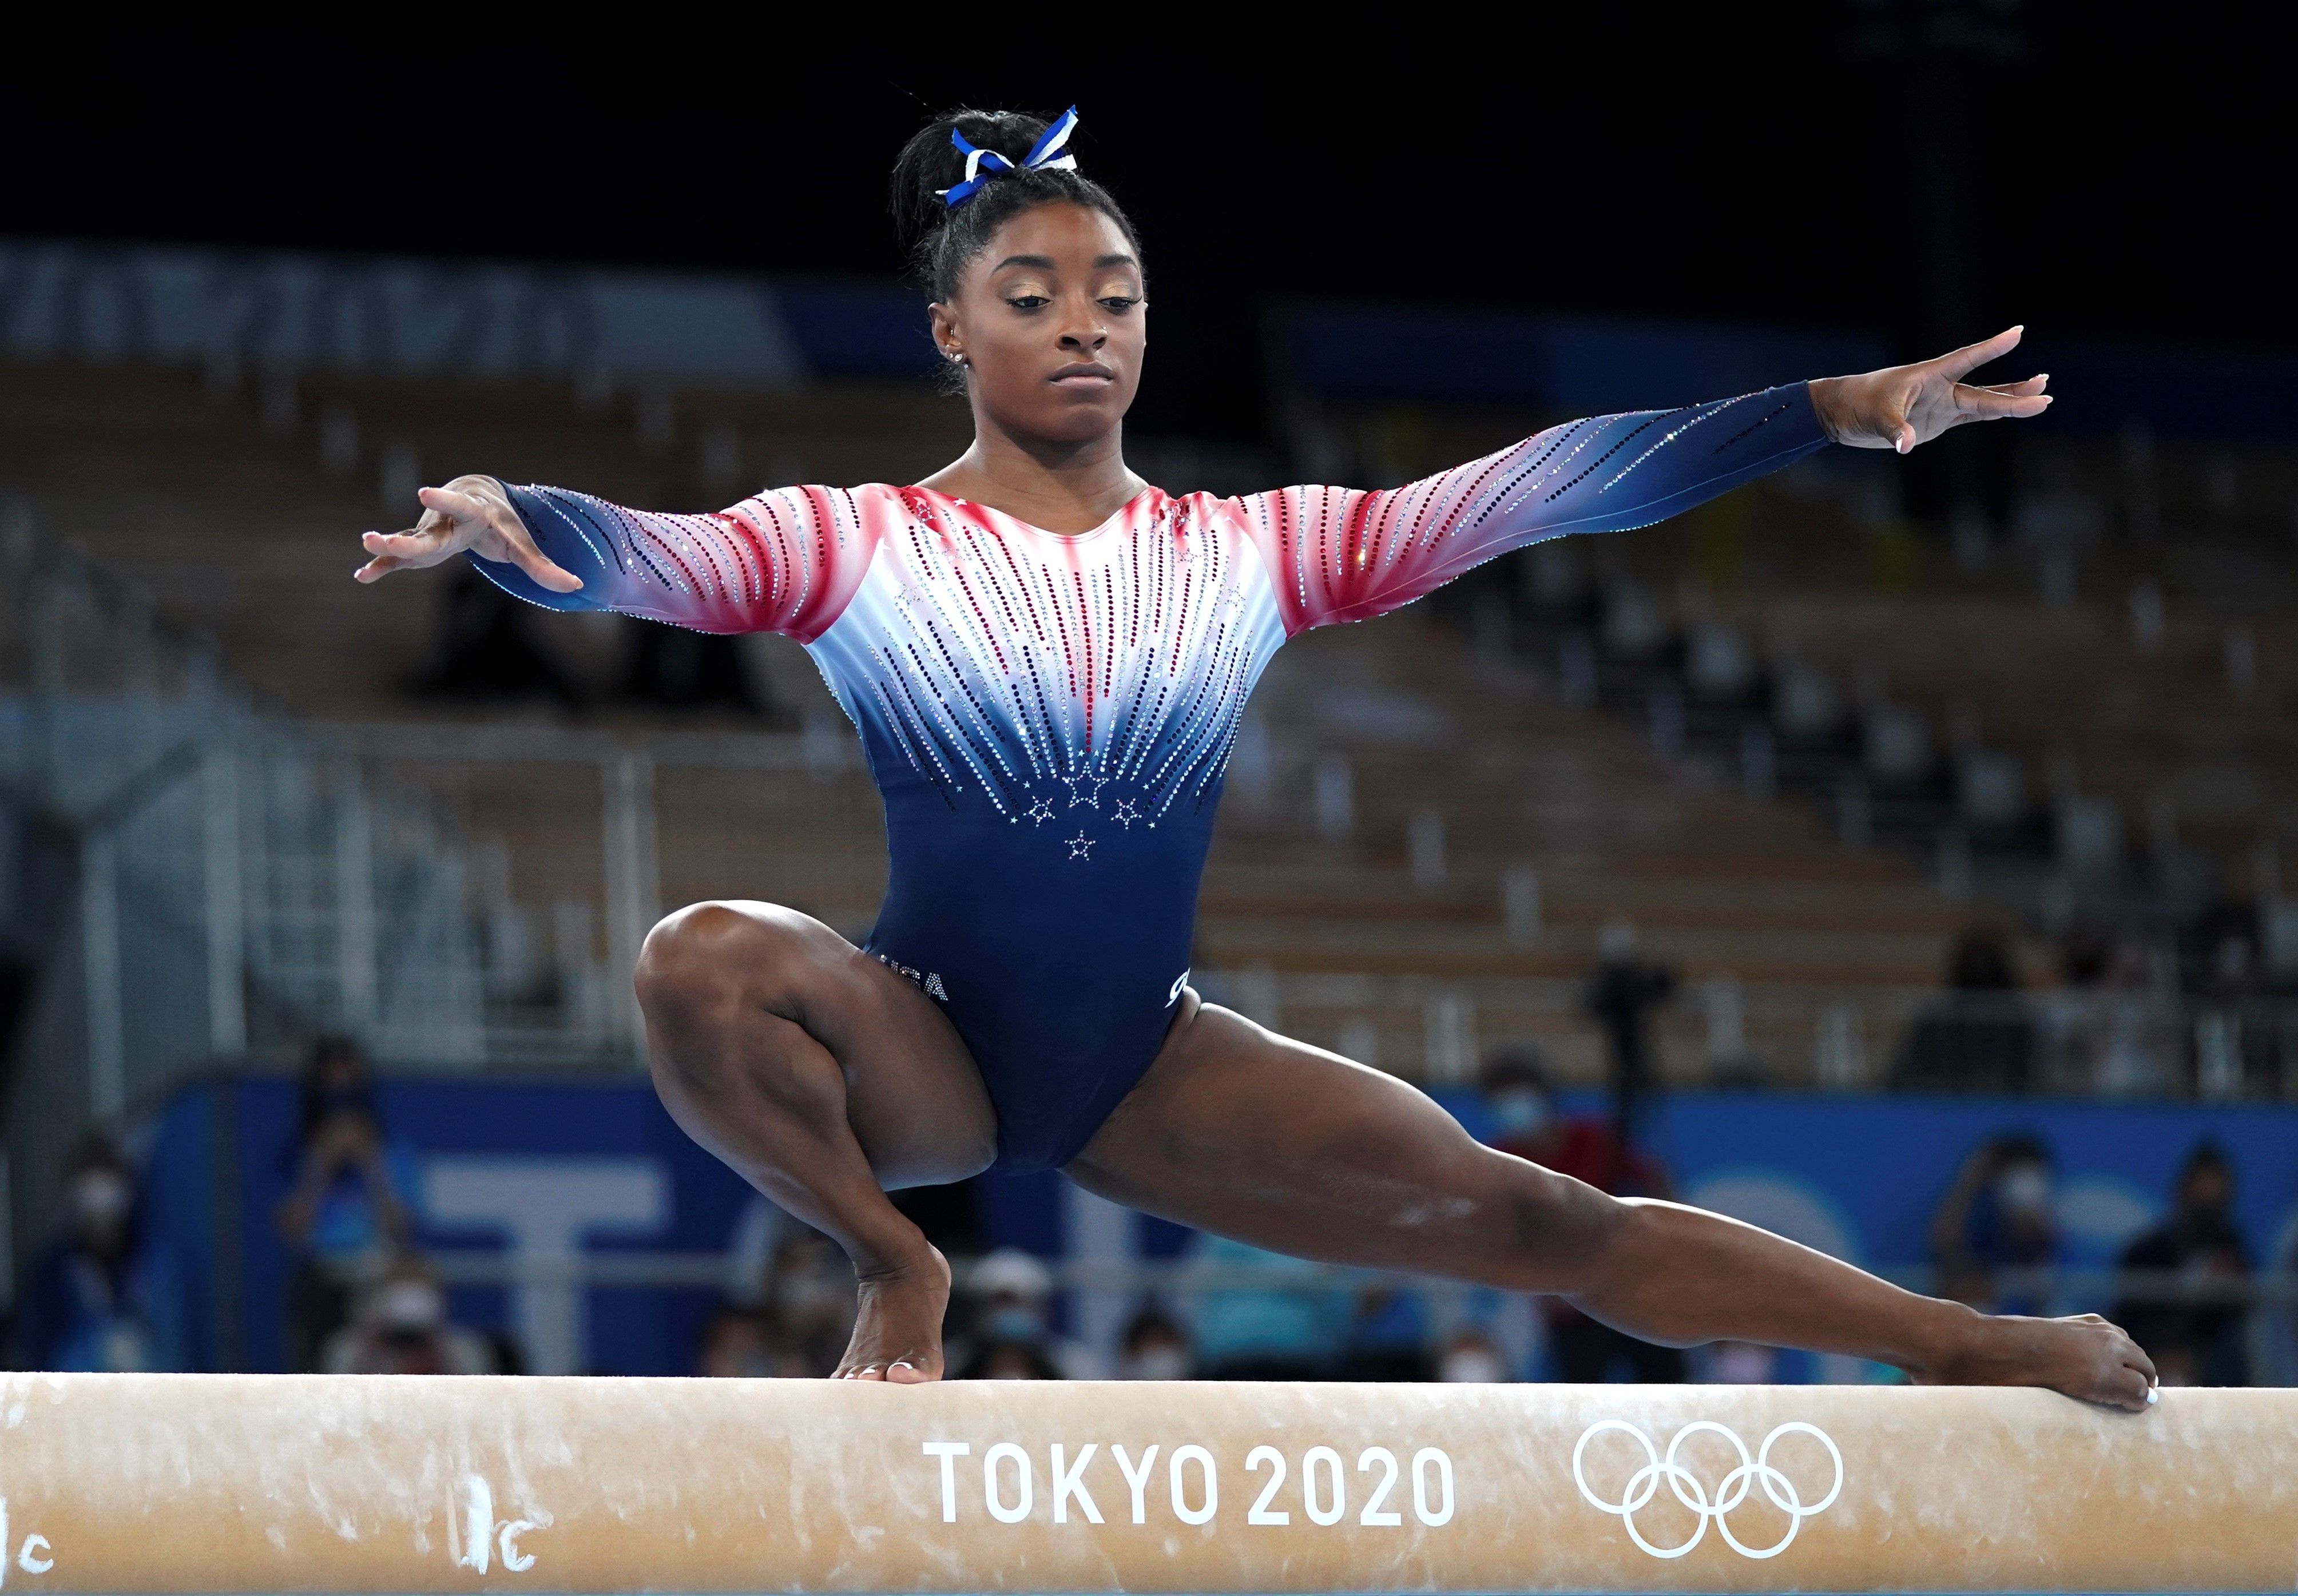 Hinting At 'Unfinished Business,' Simone Biles Seems Interested in a 2024 Paris Olympics Appearance